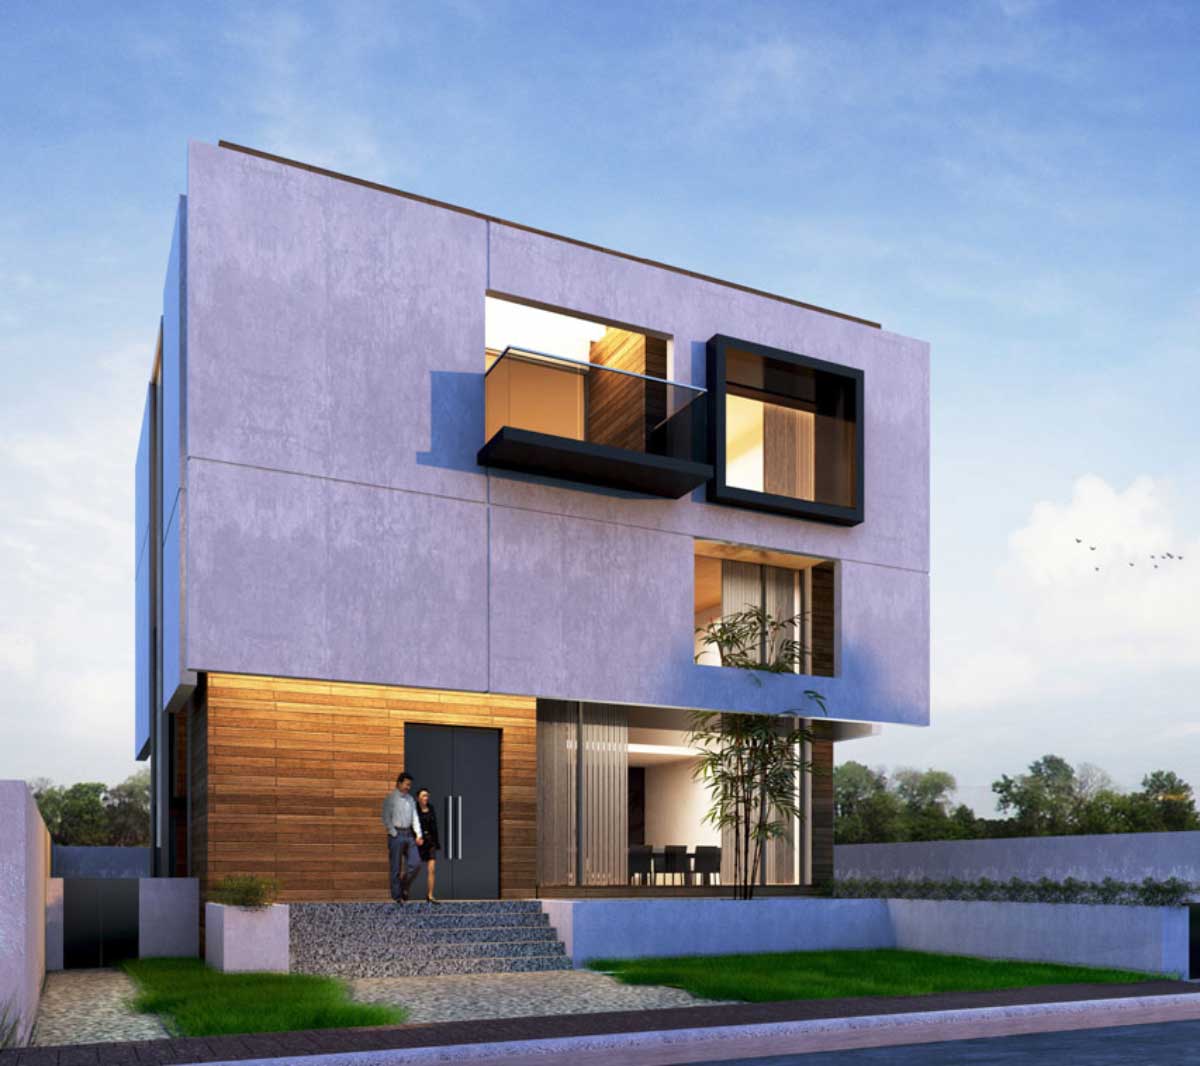 The 4-Walls Residence features a modern and minimalist style of architecture for a small family in Alabang, Manila Philippines. The house design initially takes the proportions of a cube.